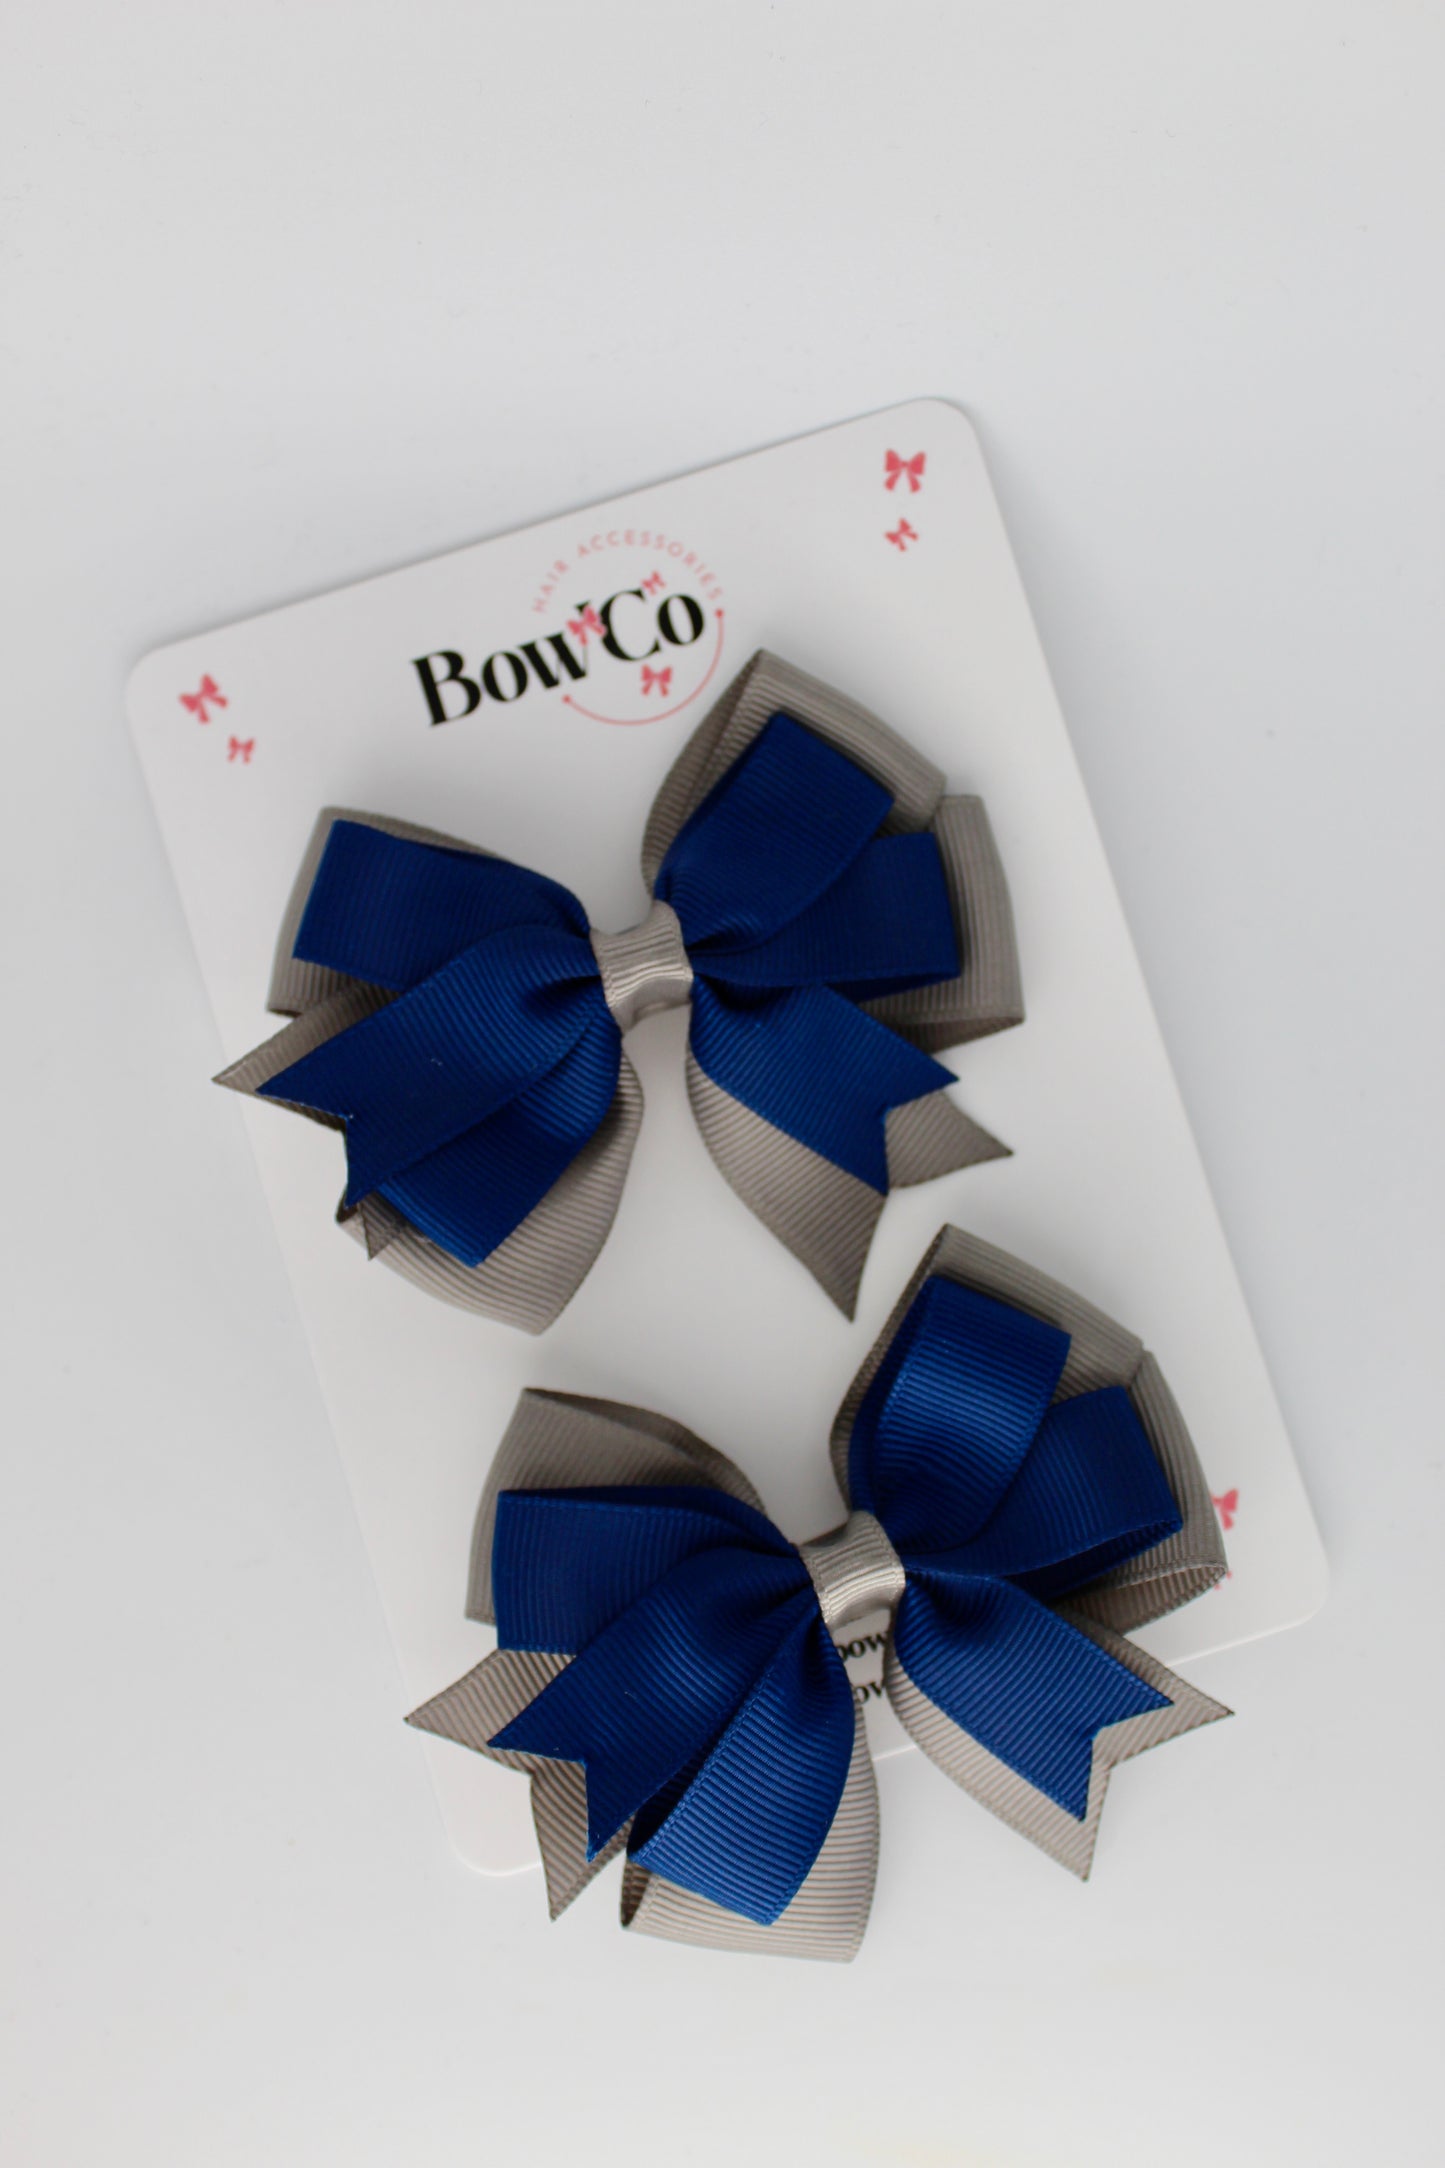 3 Inch Double Tail Bow - Clip - 2 Pack - Navy Blue and Metal Grey